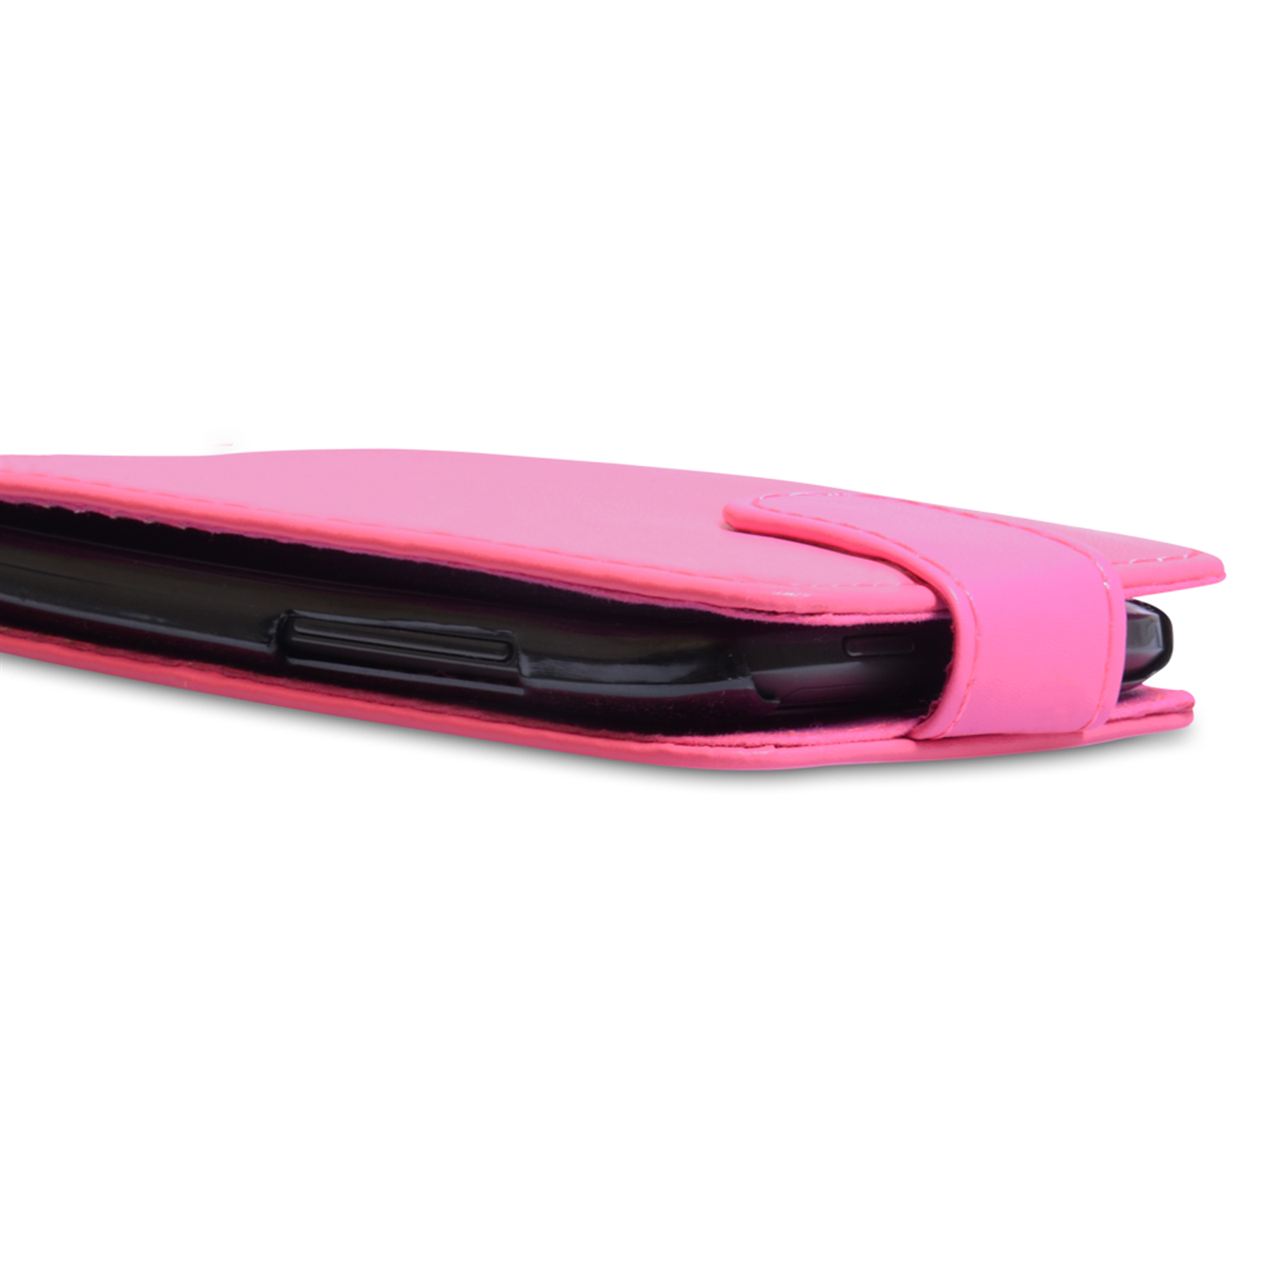 YouSave Accessories HTC One X Leather-Effect Flip Case - Hot Pink